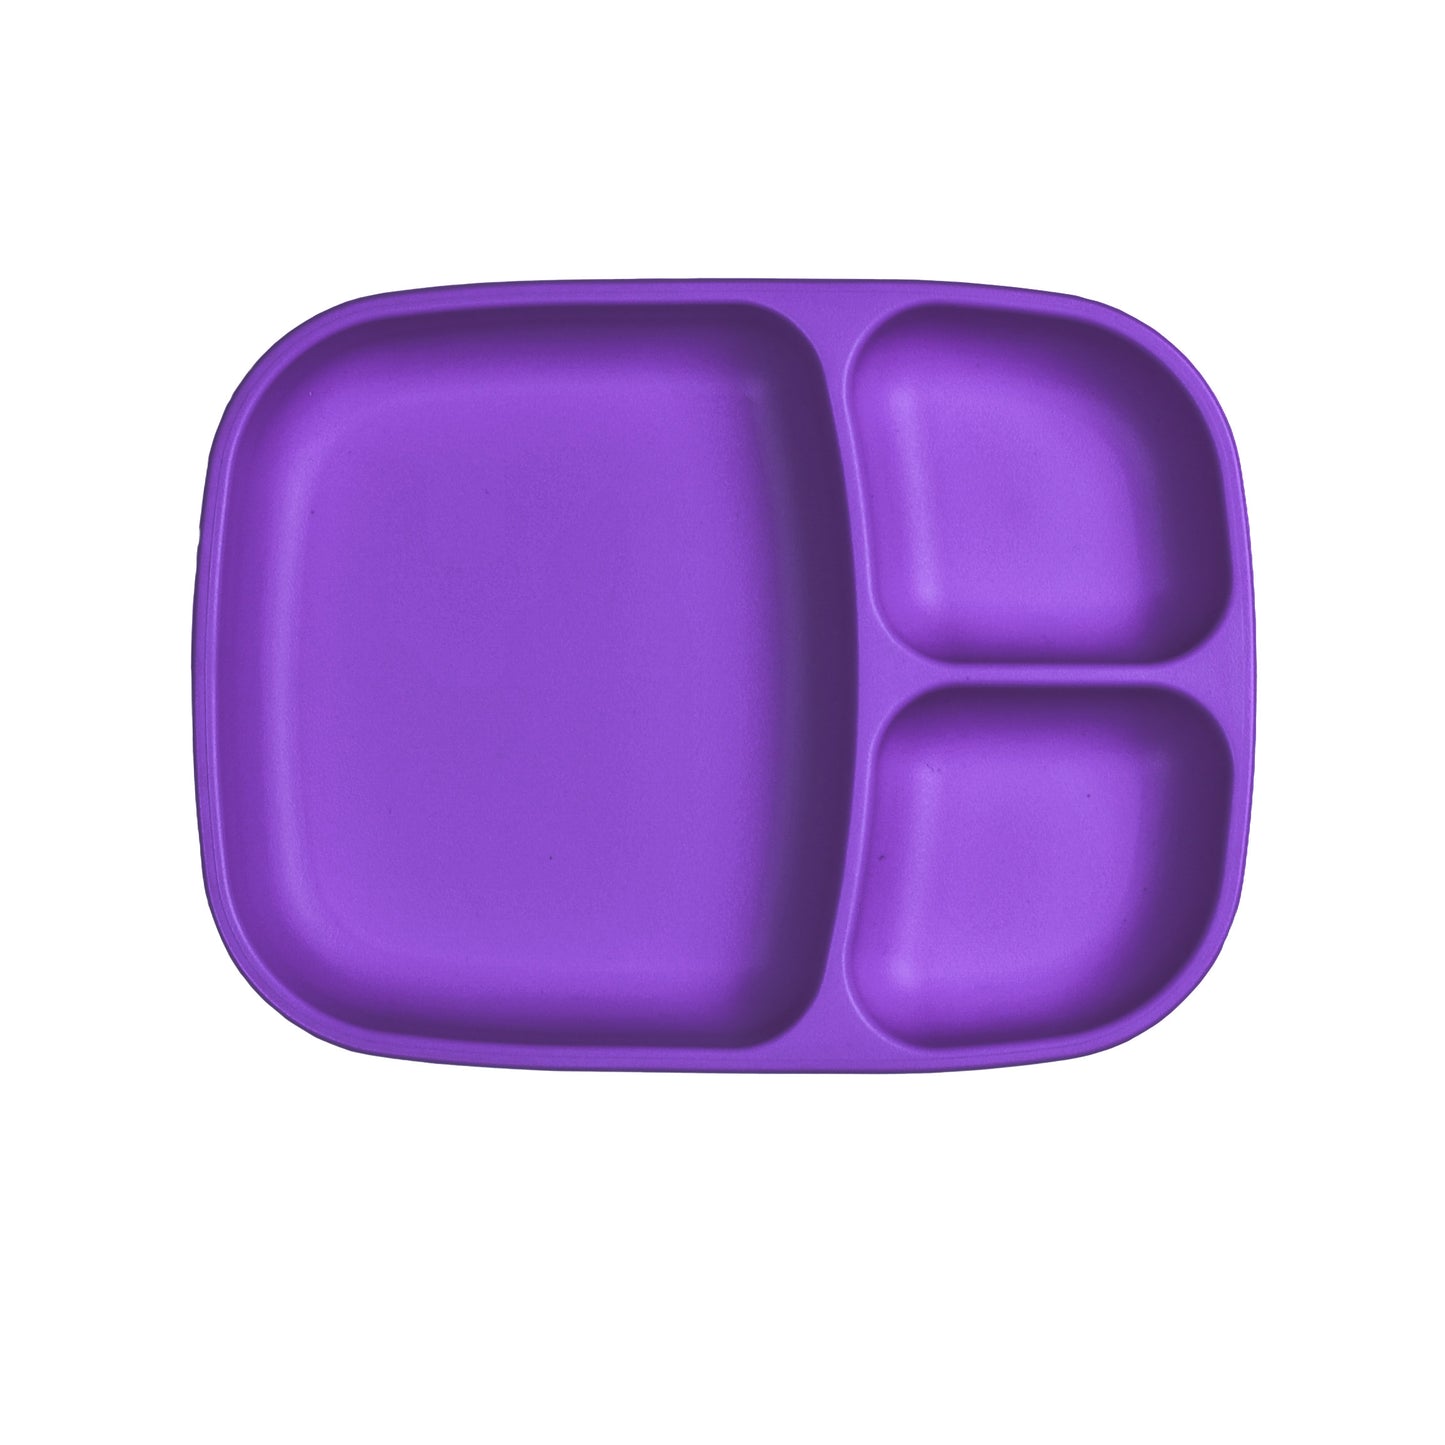 Re-Play Large Divided Plate - Amethyst